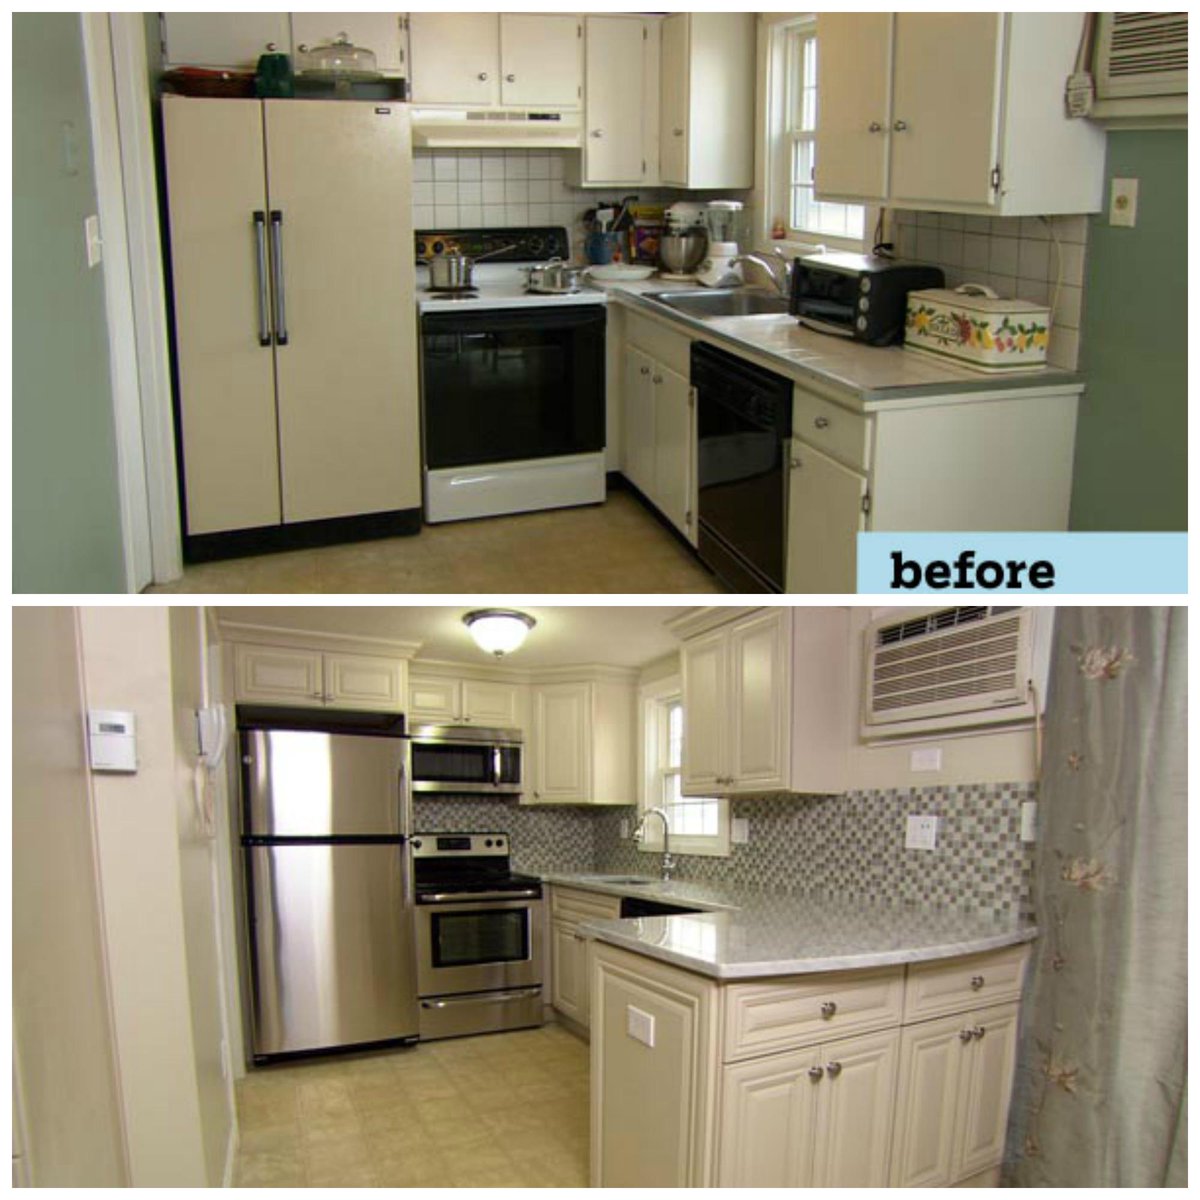 This Old House On Twitter Before After A Complete Kitchen Renovation That Sticks To A Sensible Budget Via Asktoh Tv Http T Co Peewuljs7j Http T Co Baks0opt4o,Door Hanging Shoe Rack